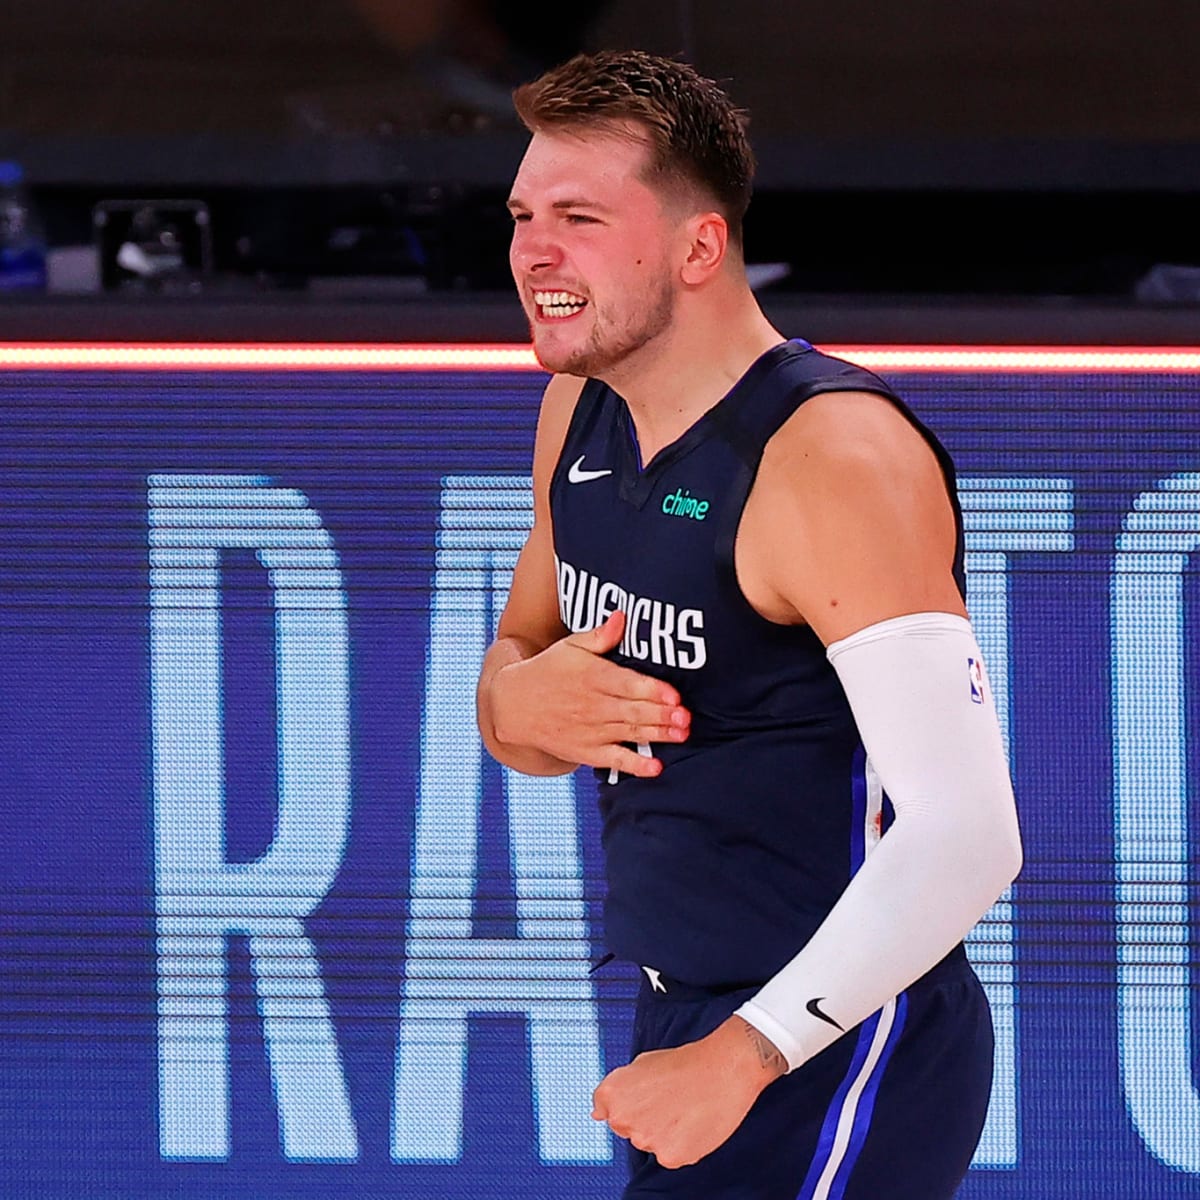 NBA fans worried about Luka Doncic as Dallas Mavericks star says